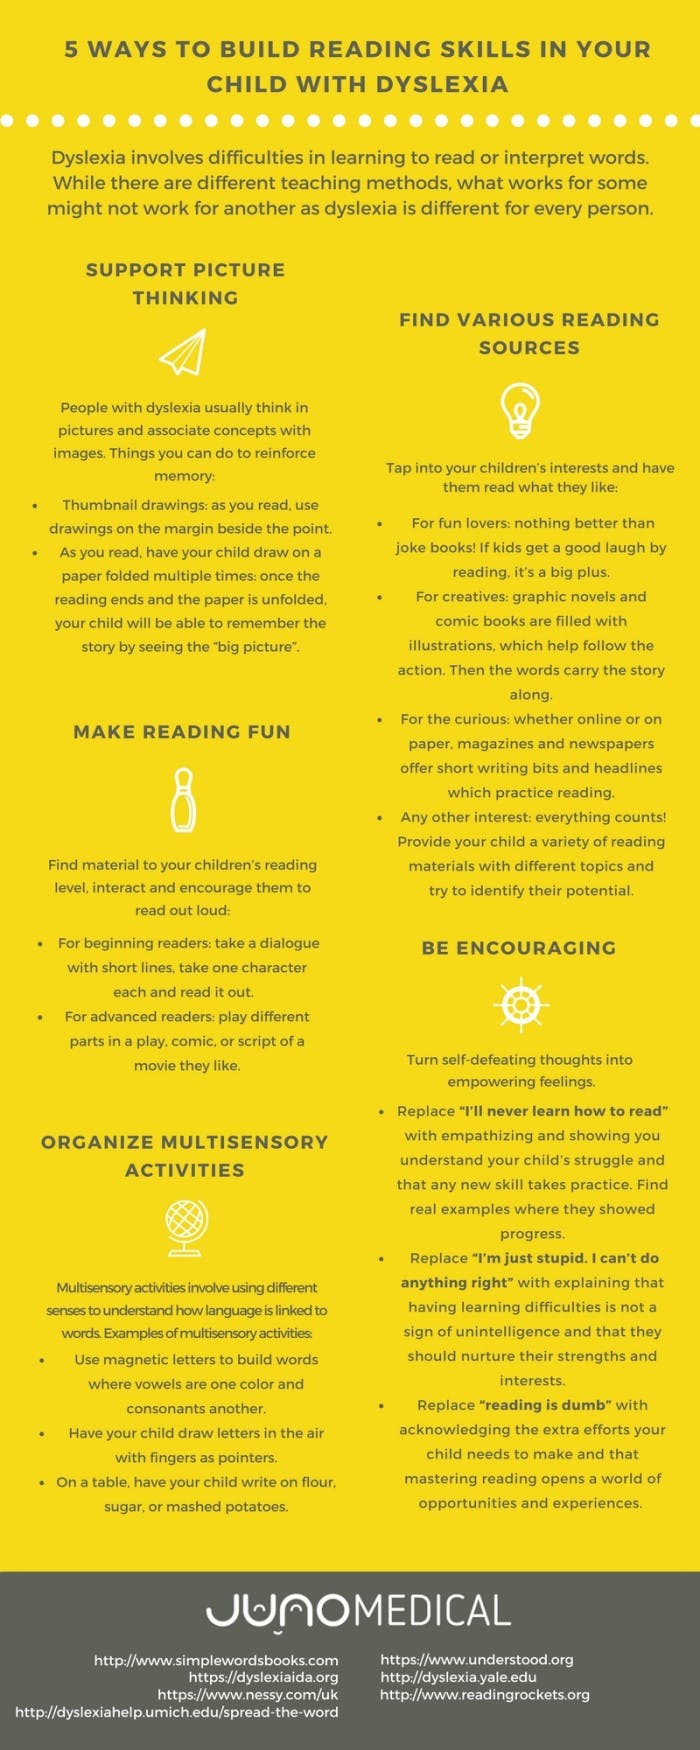 EN image 1 for Infographic - ​Infographic - 5 Ways to Build Reading Skills in Your Child with Dyslexia